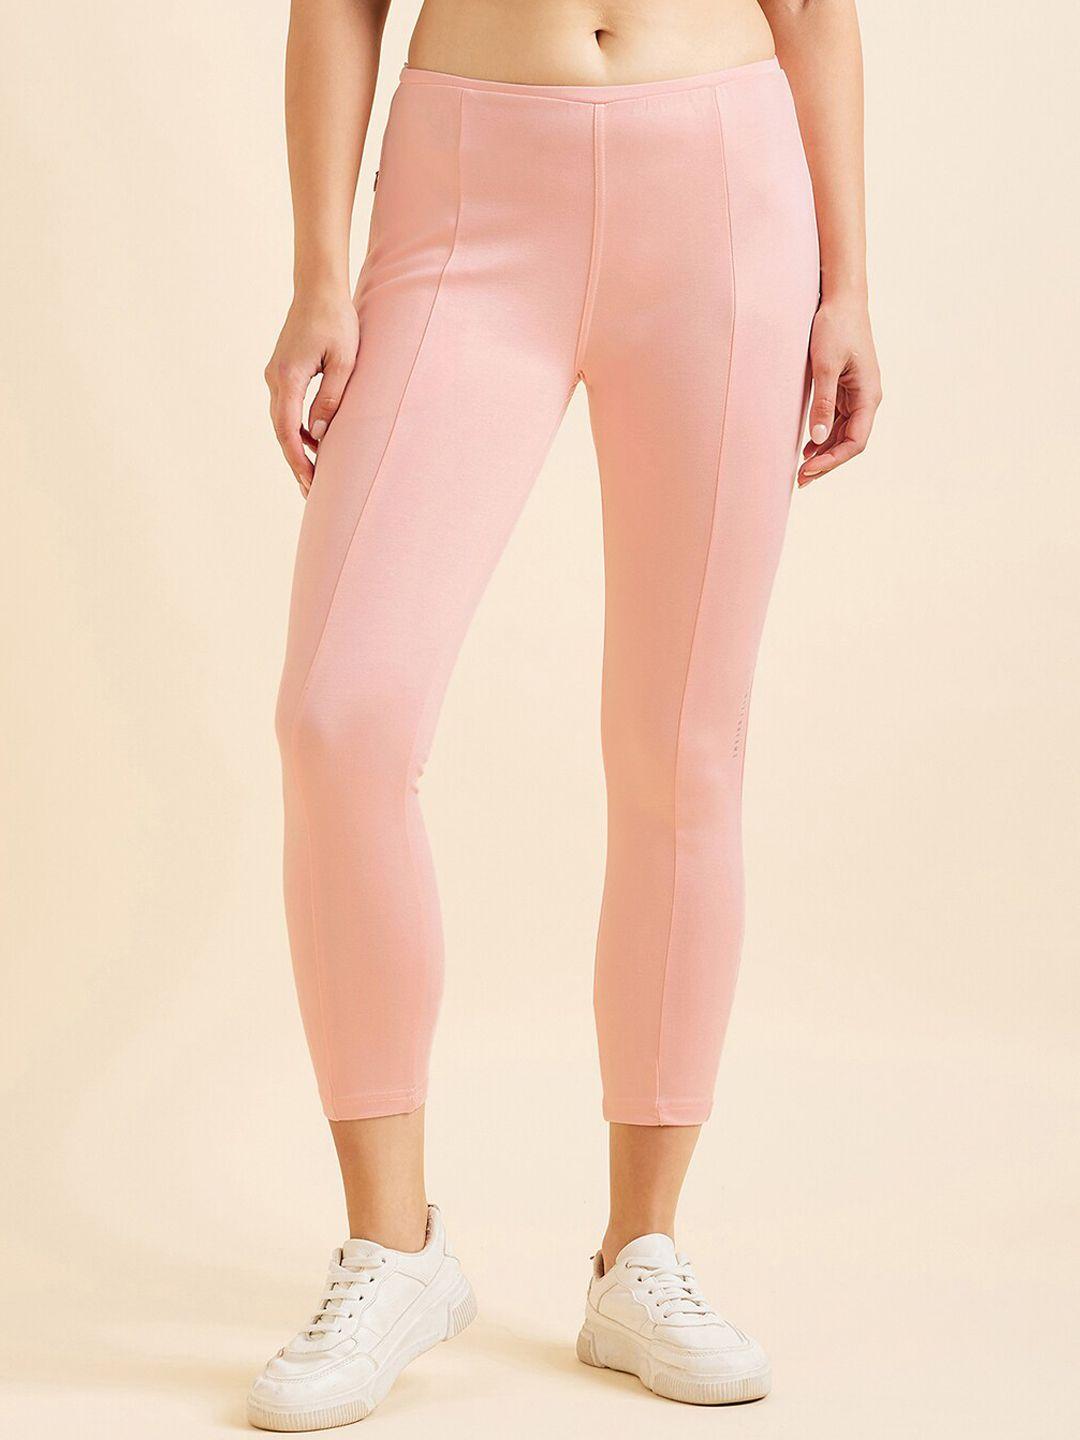 sweet-dreams-women-pink-high-rise-ankle-length-tights